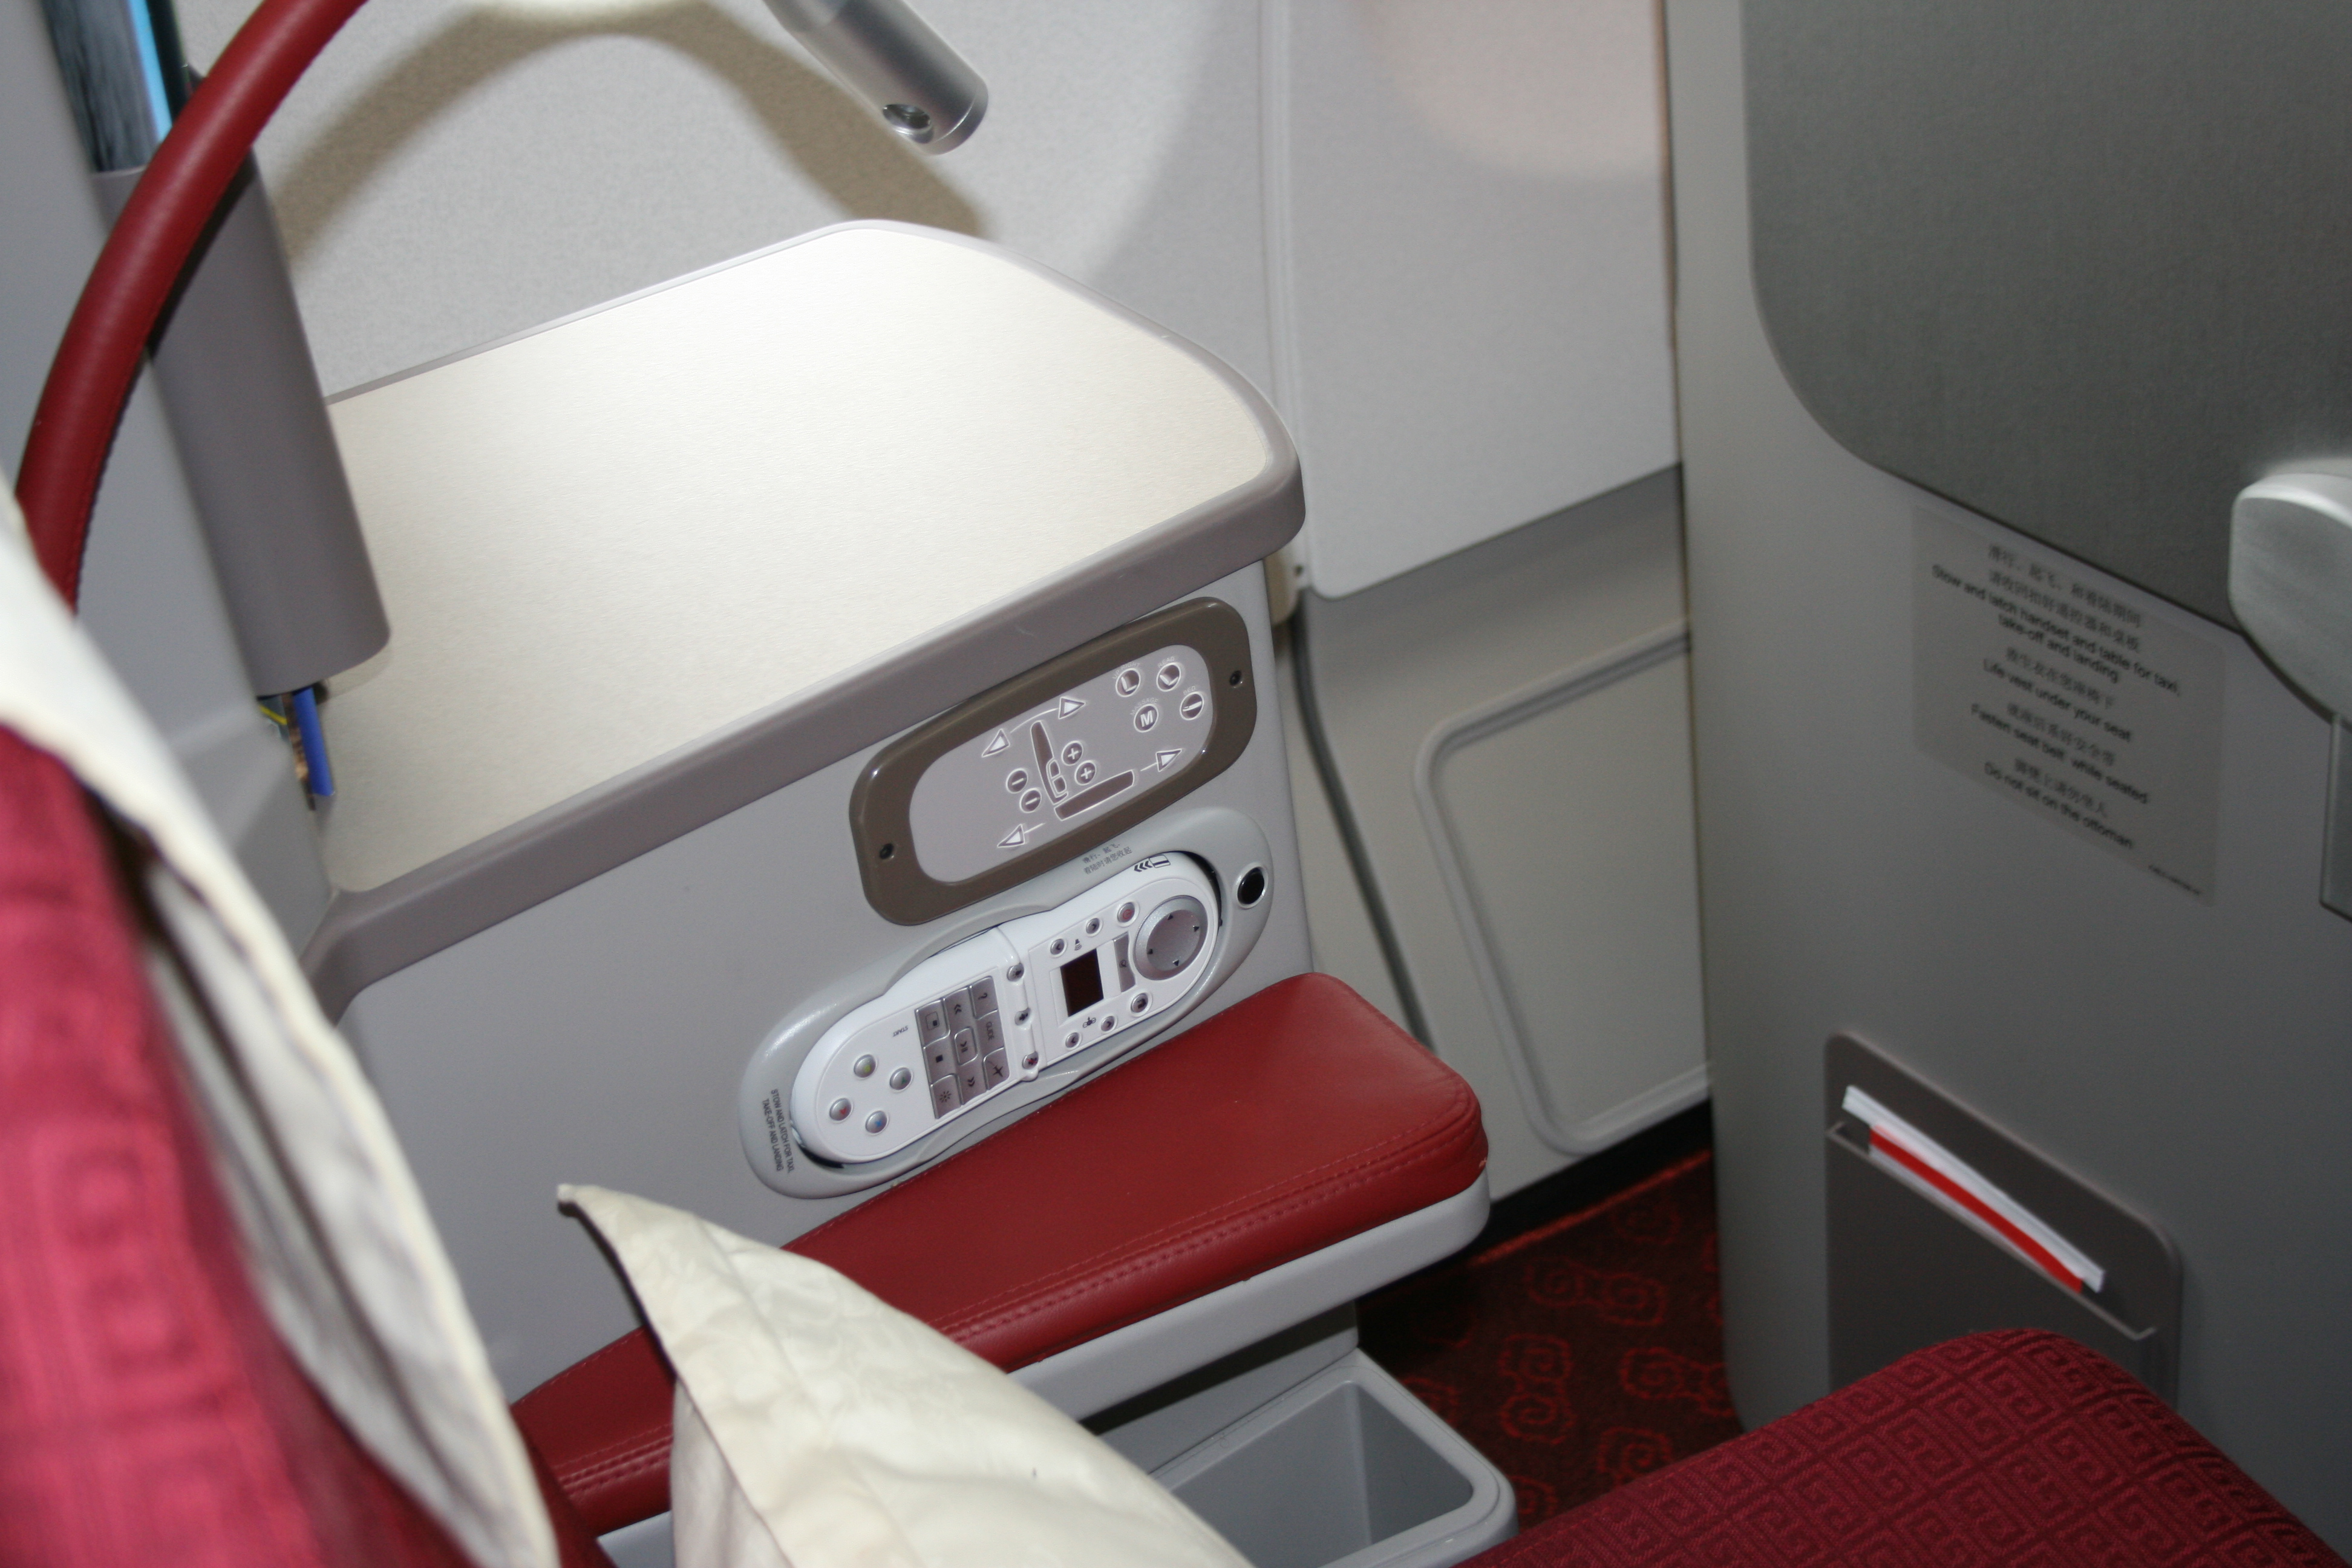 Business Class In-Flight Entertainment Options - By James Field.